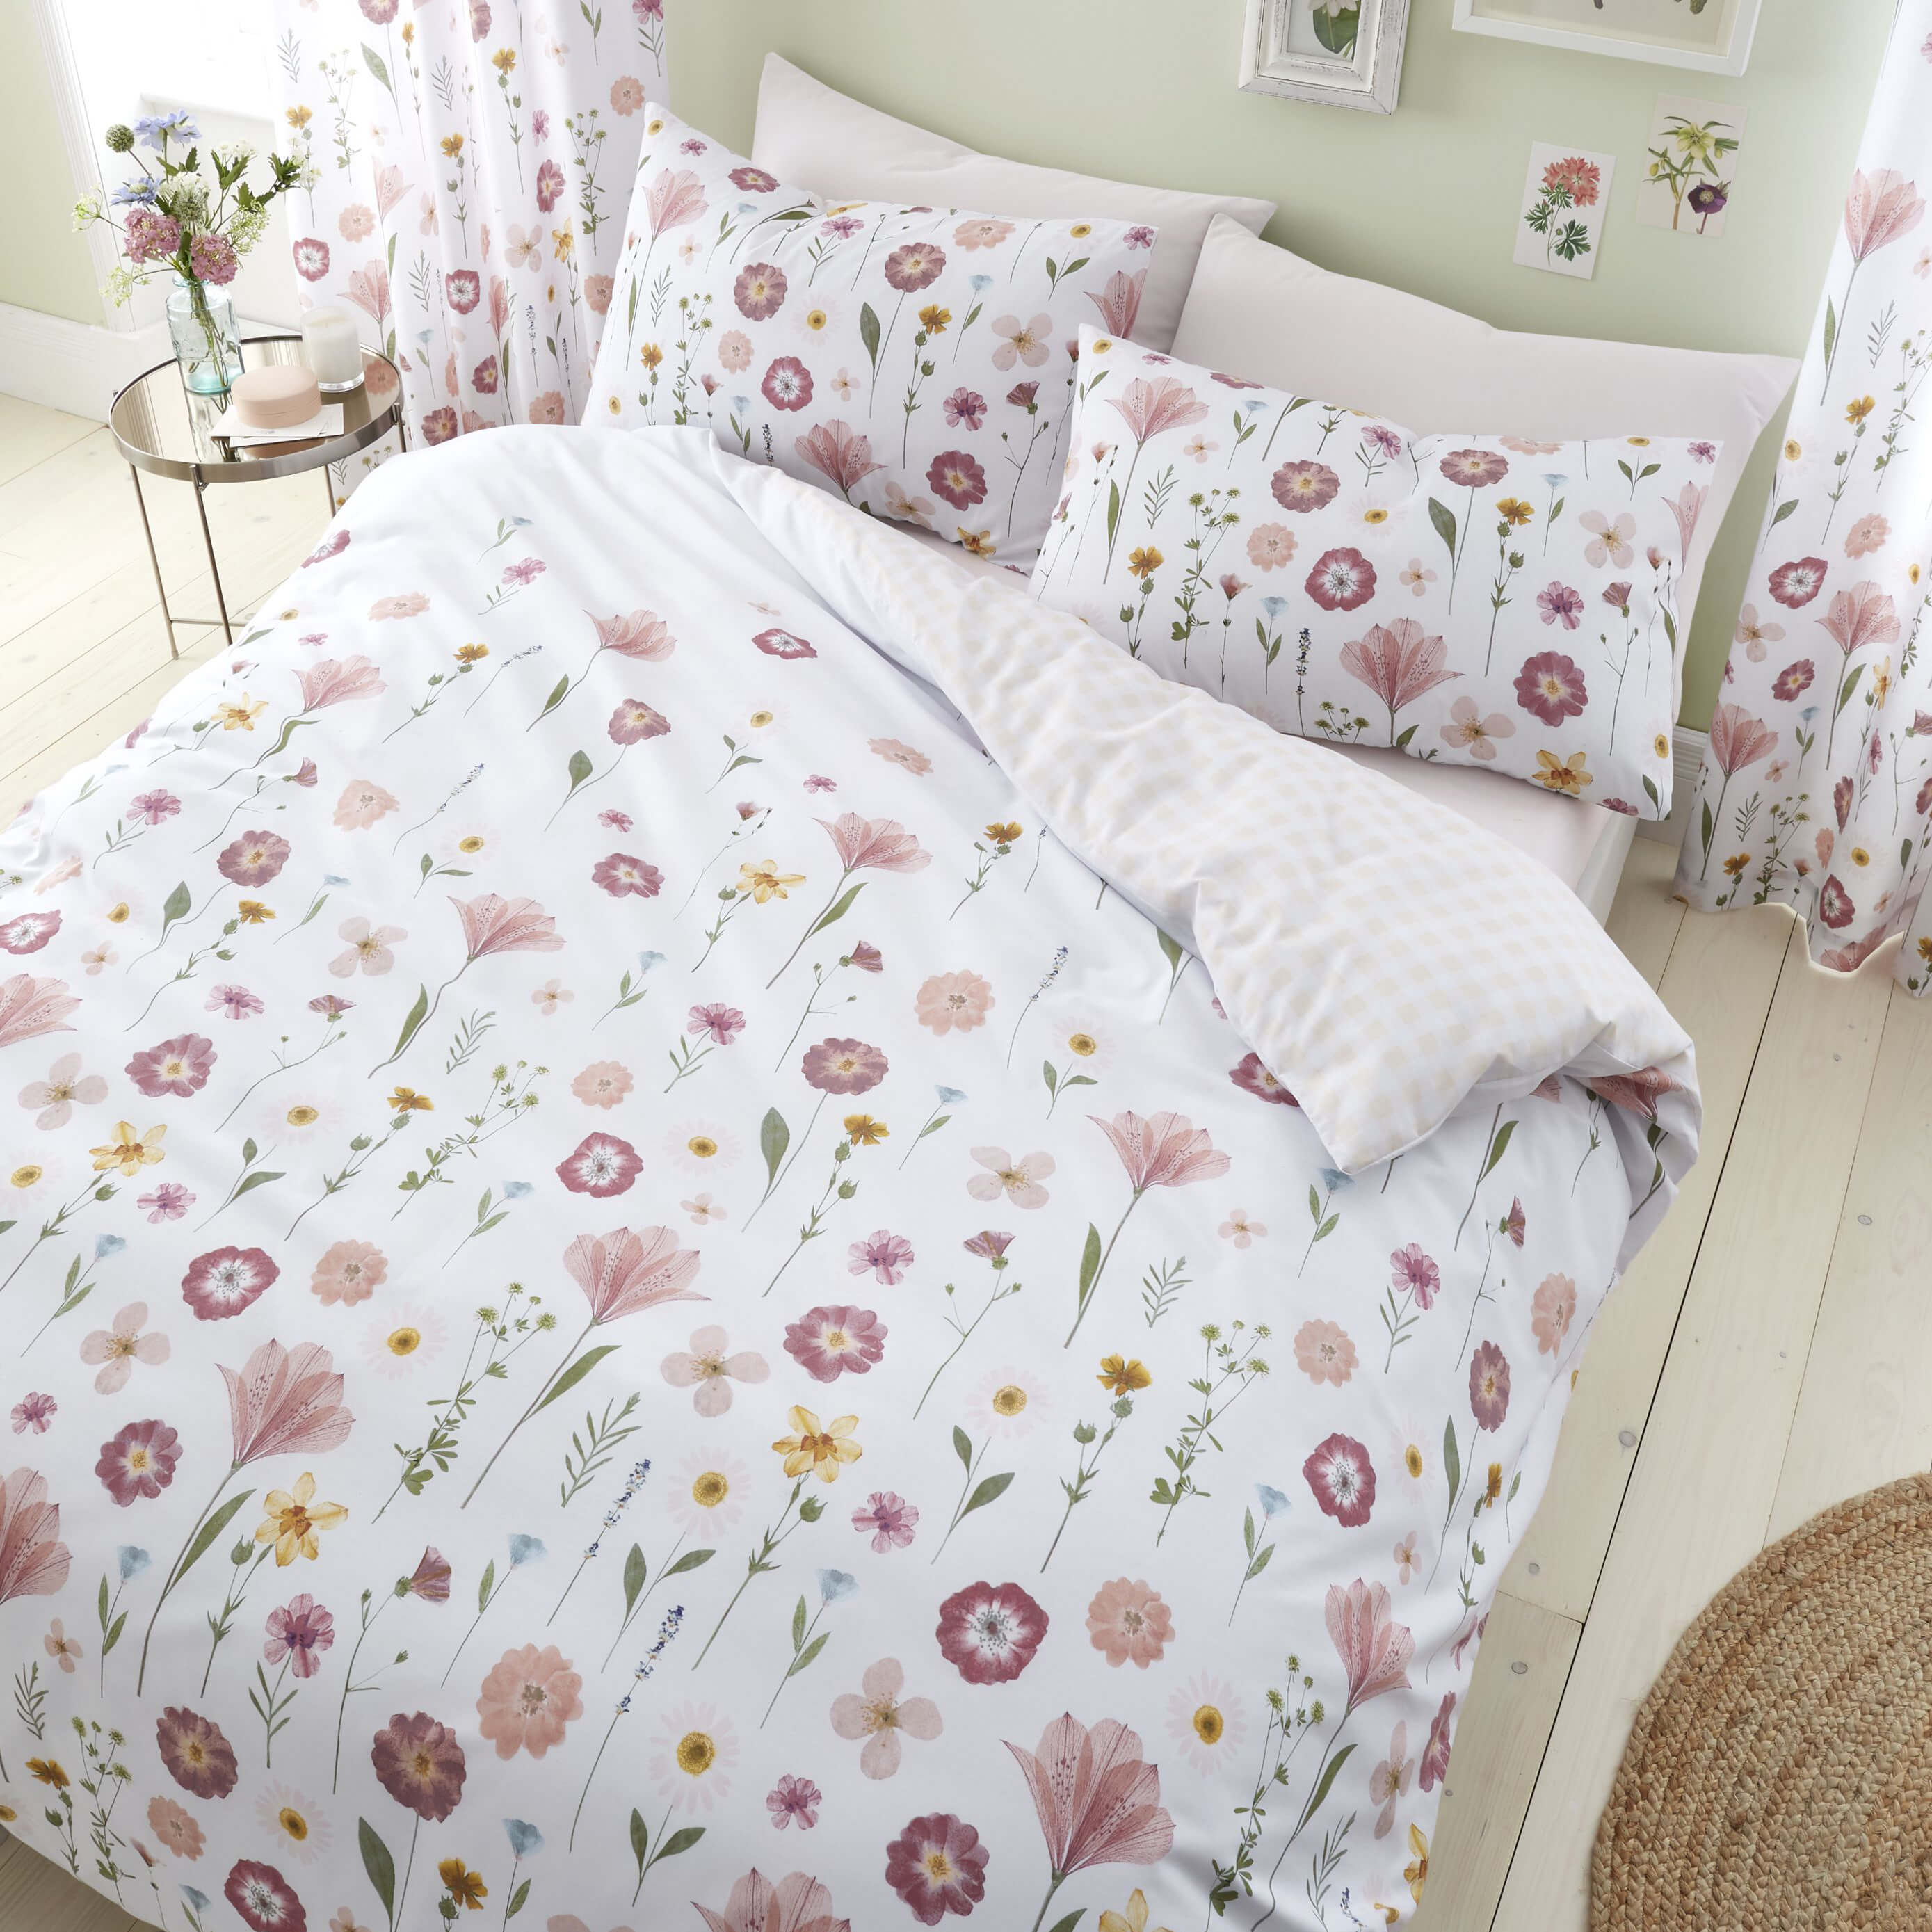  Catherine Lansfield Wild Flowers Easy Care Duvet Cover Set 1 Shaws Department Stores